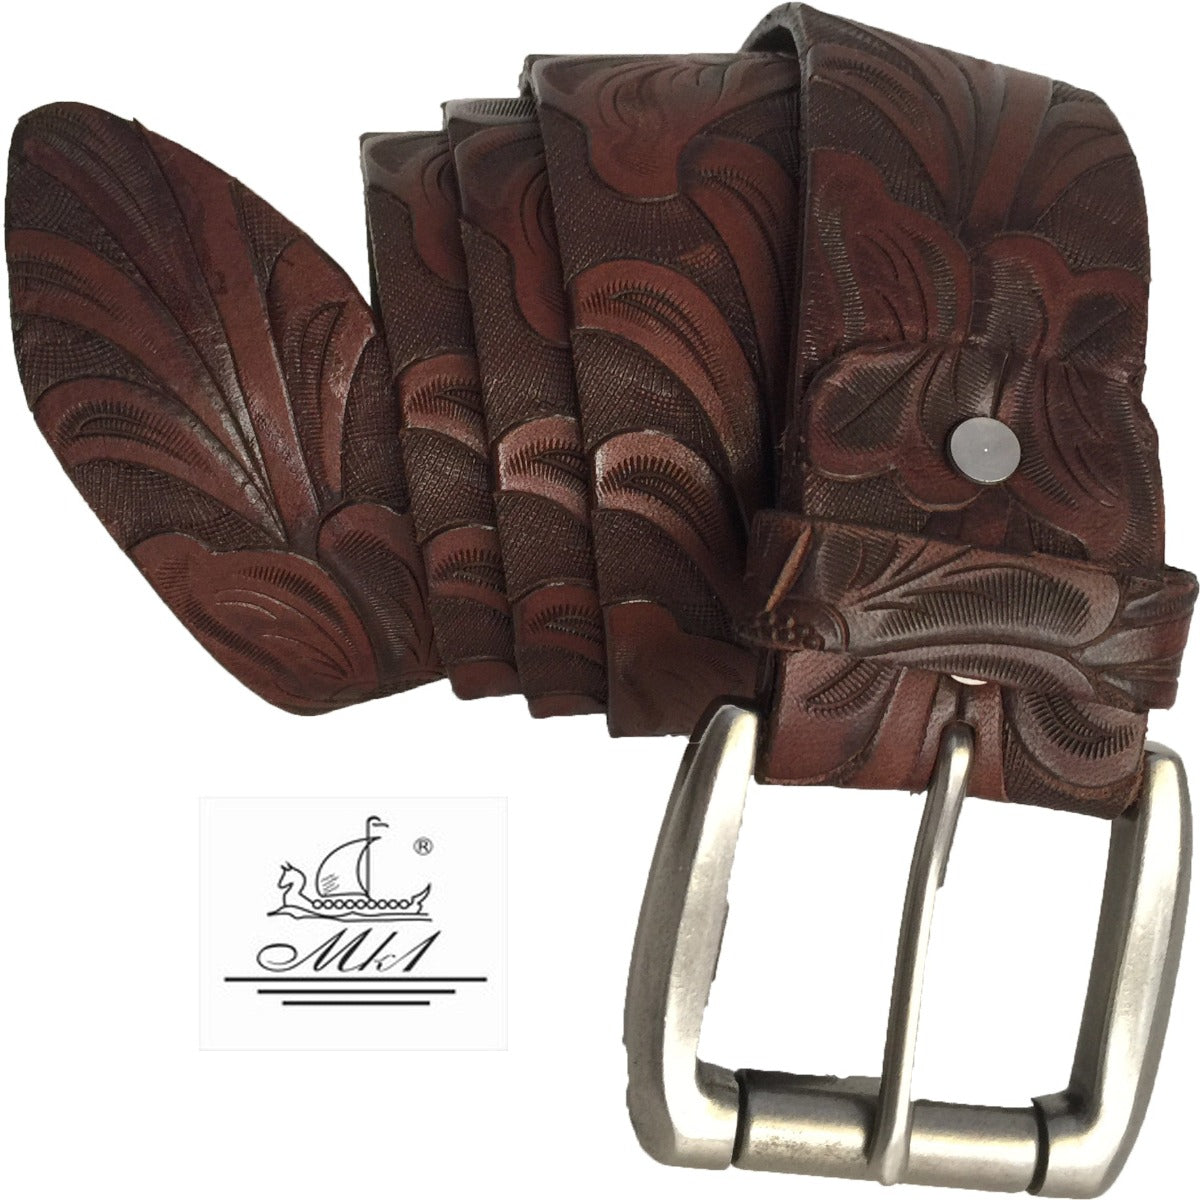 22/40k-ll Hand made  leather belt, 4 cm width, and  roll buckle.